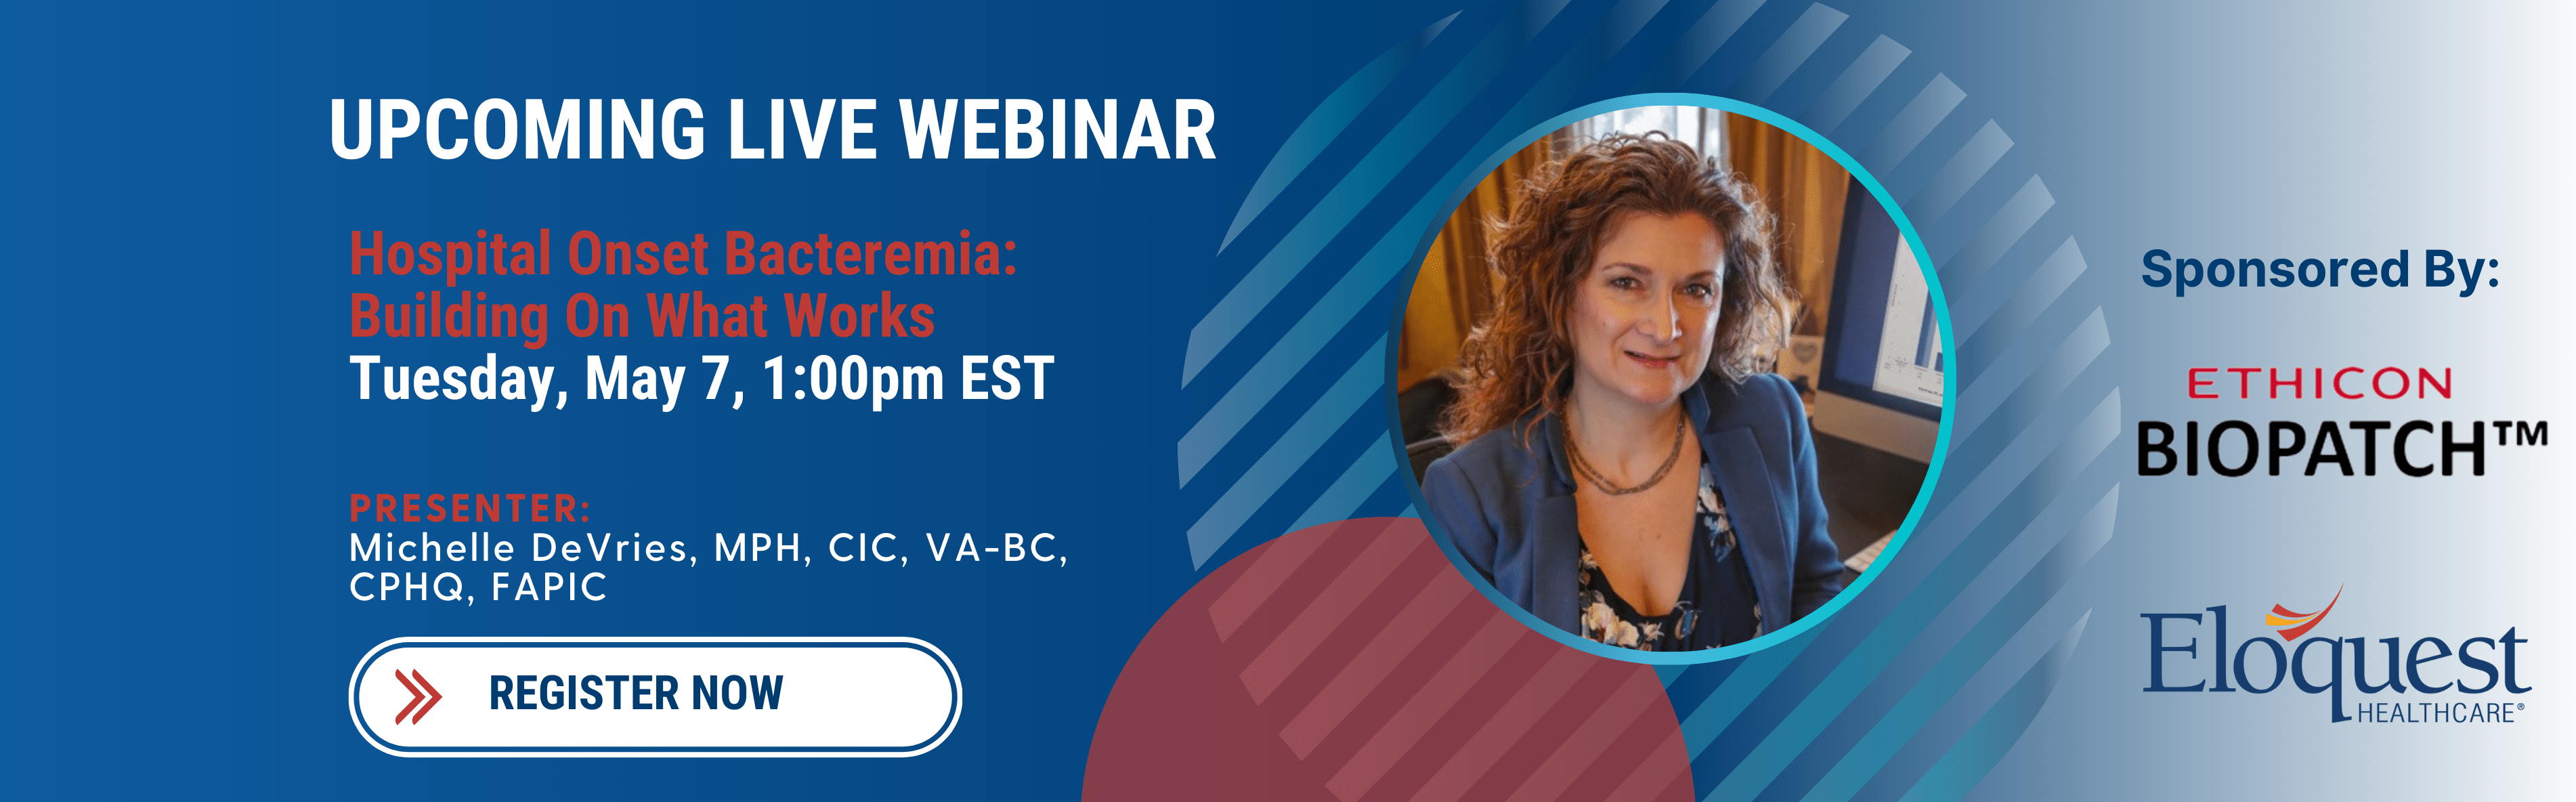 Register for a live webinar presented by Michelle DeVries Ethicon Biopatch HOB Hospital Onset Bacteremia